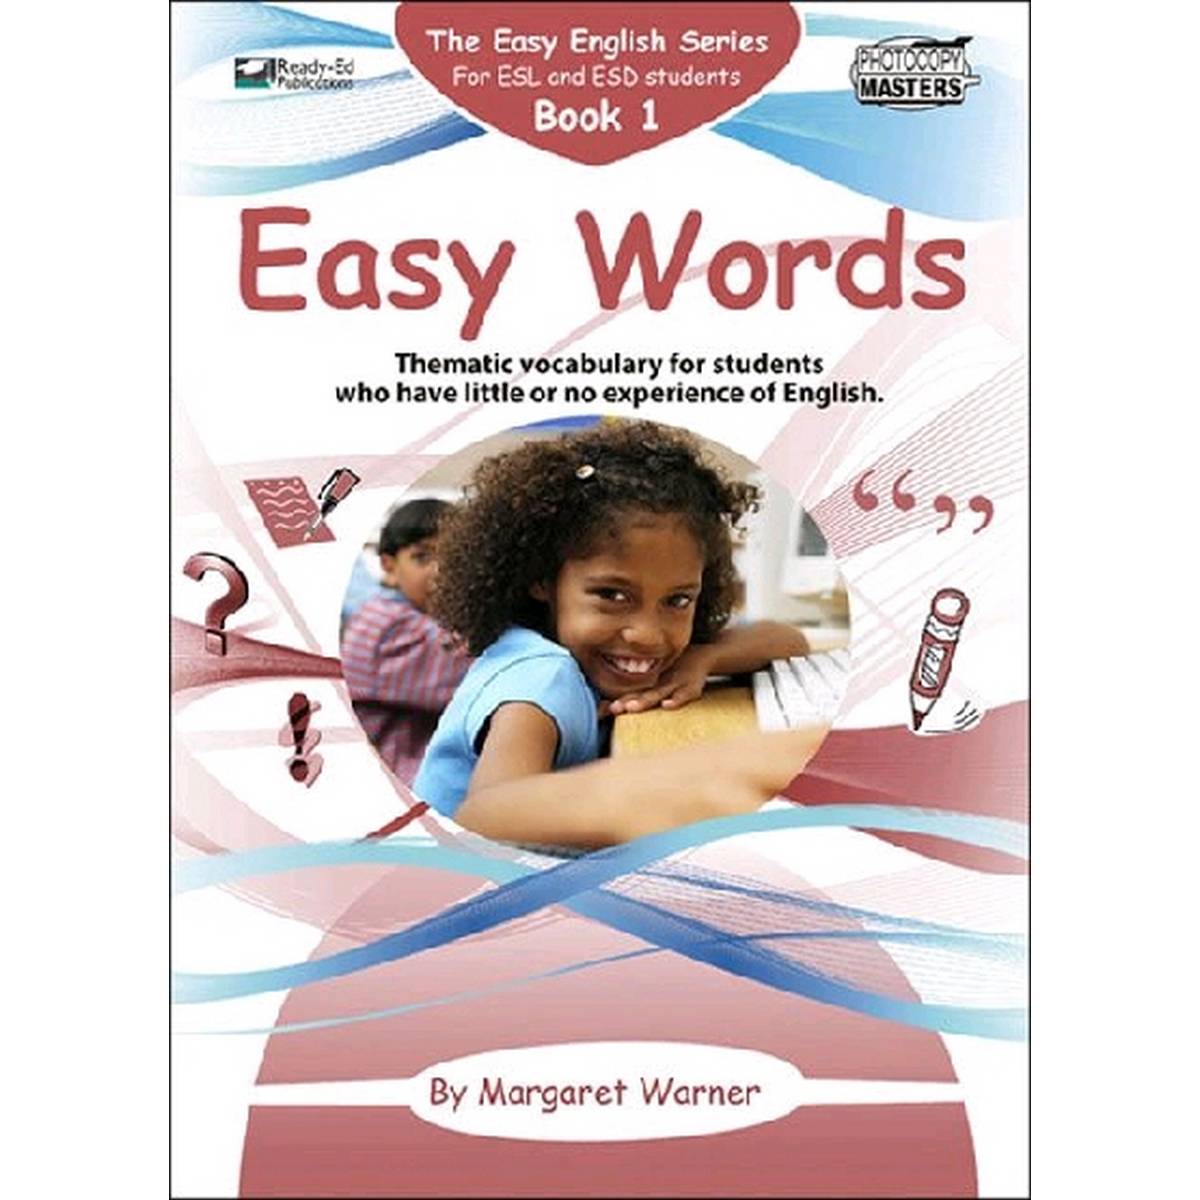 Easy English Series Book 1 Easy Words